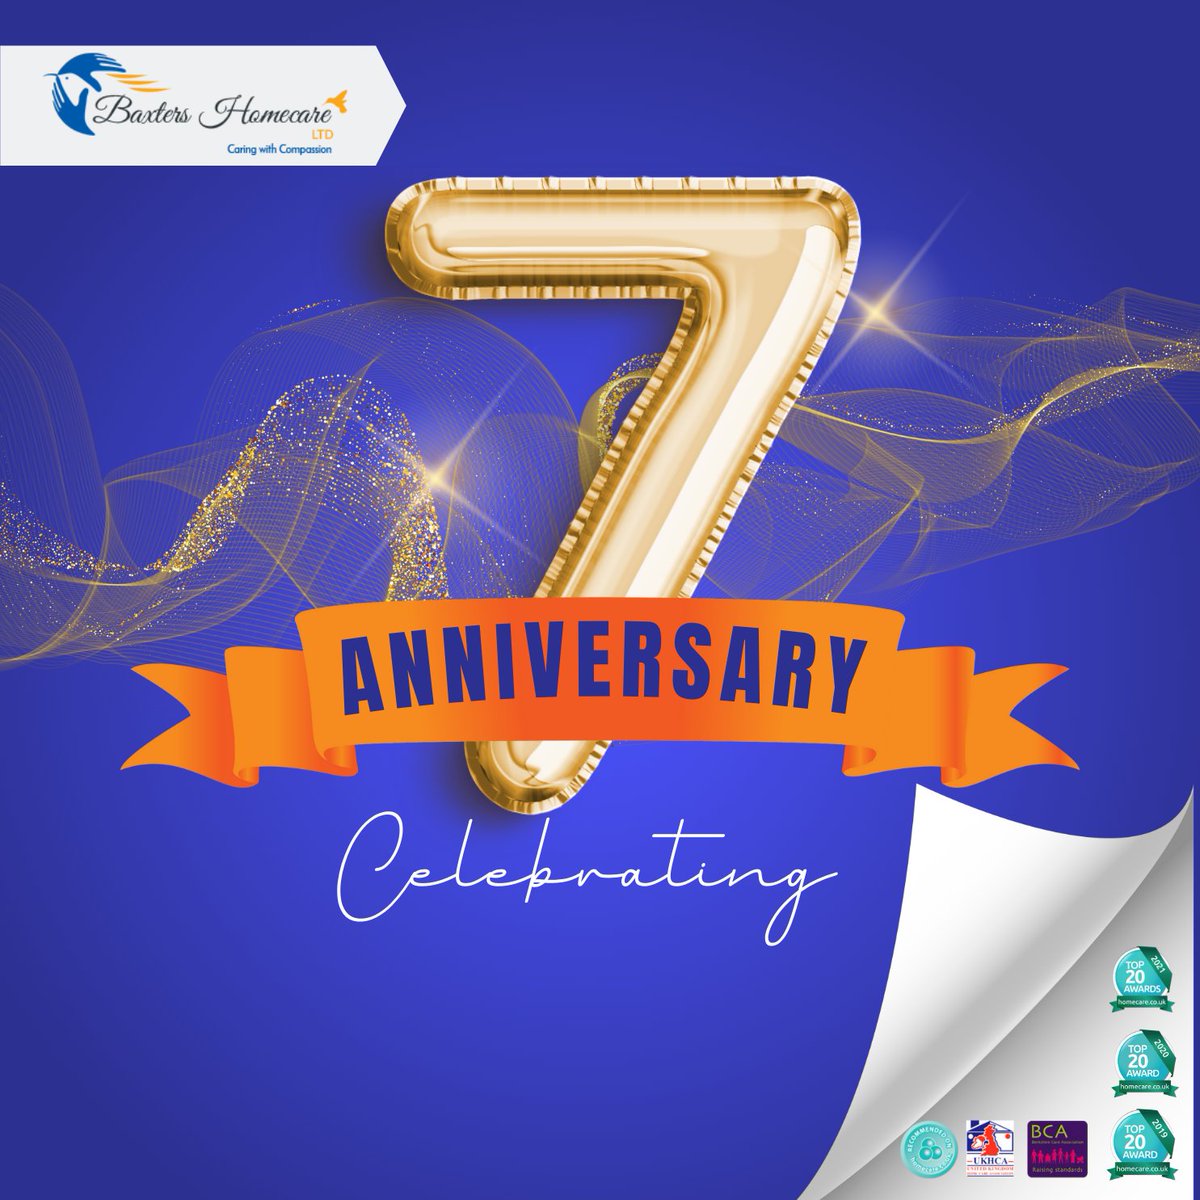 7 years of making home a happier and healthier place. Thank you for letting us care for you and your loved ones. Here's to many more years of compassion and excellence. #BaxtersHomecareAnniversary #Homecareuk #Healthcareuk #CaringForYou #baxtershomecare
#homecareassistant